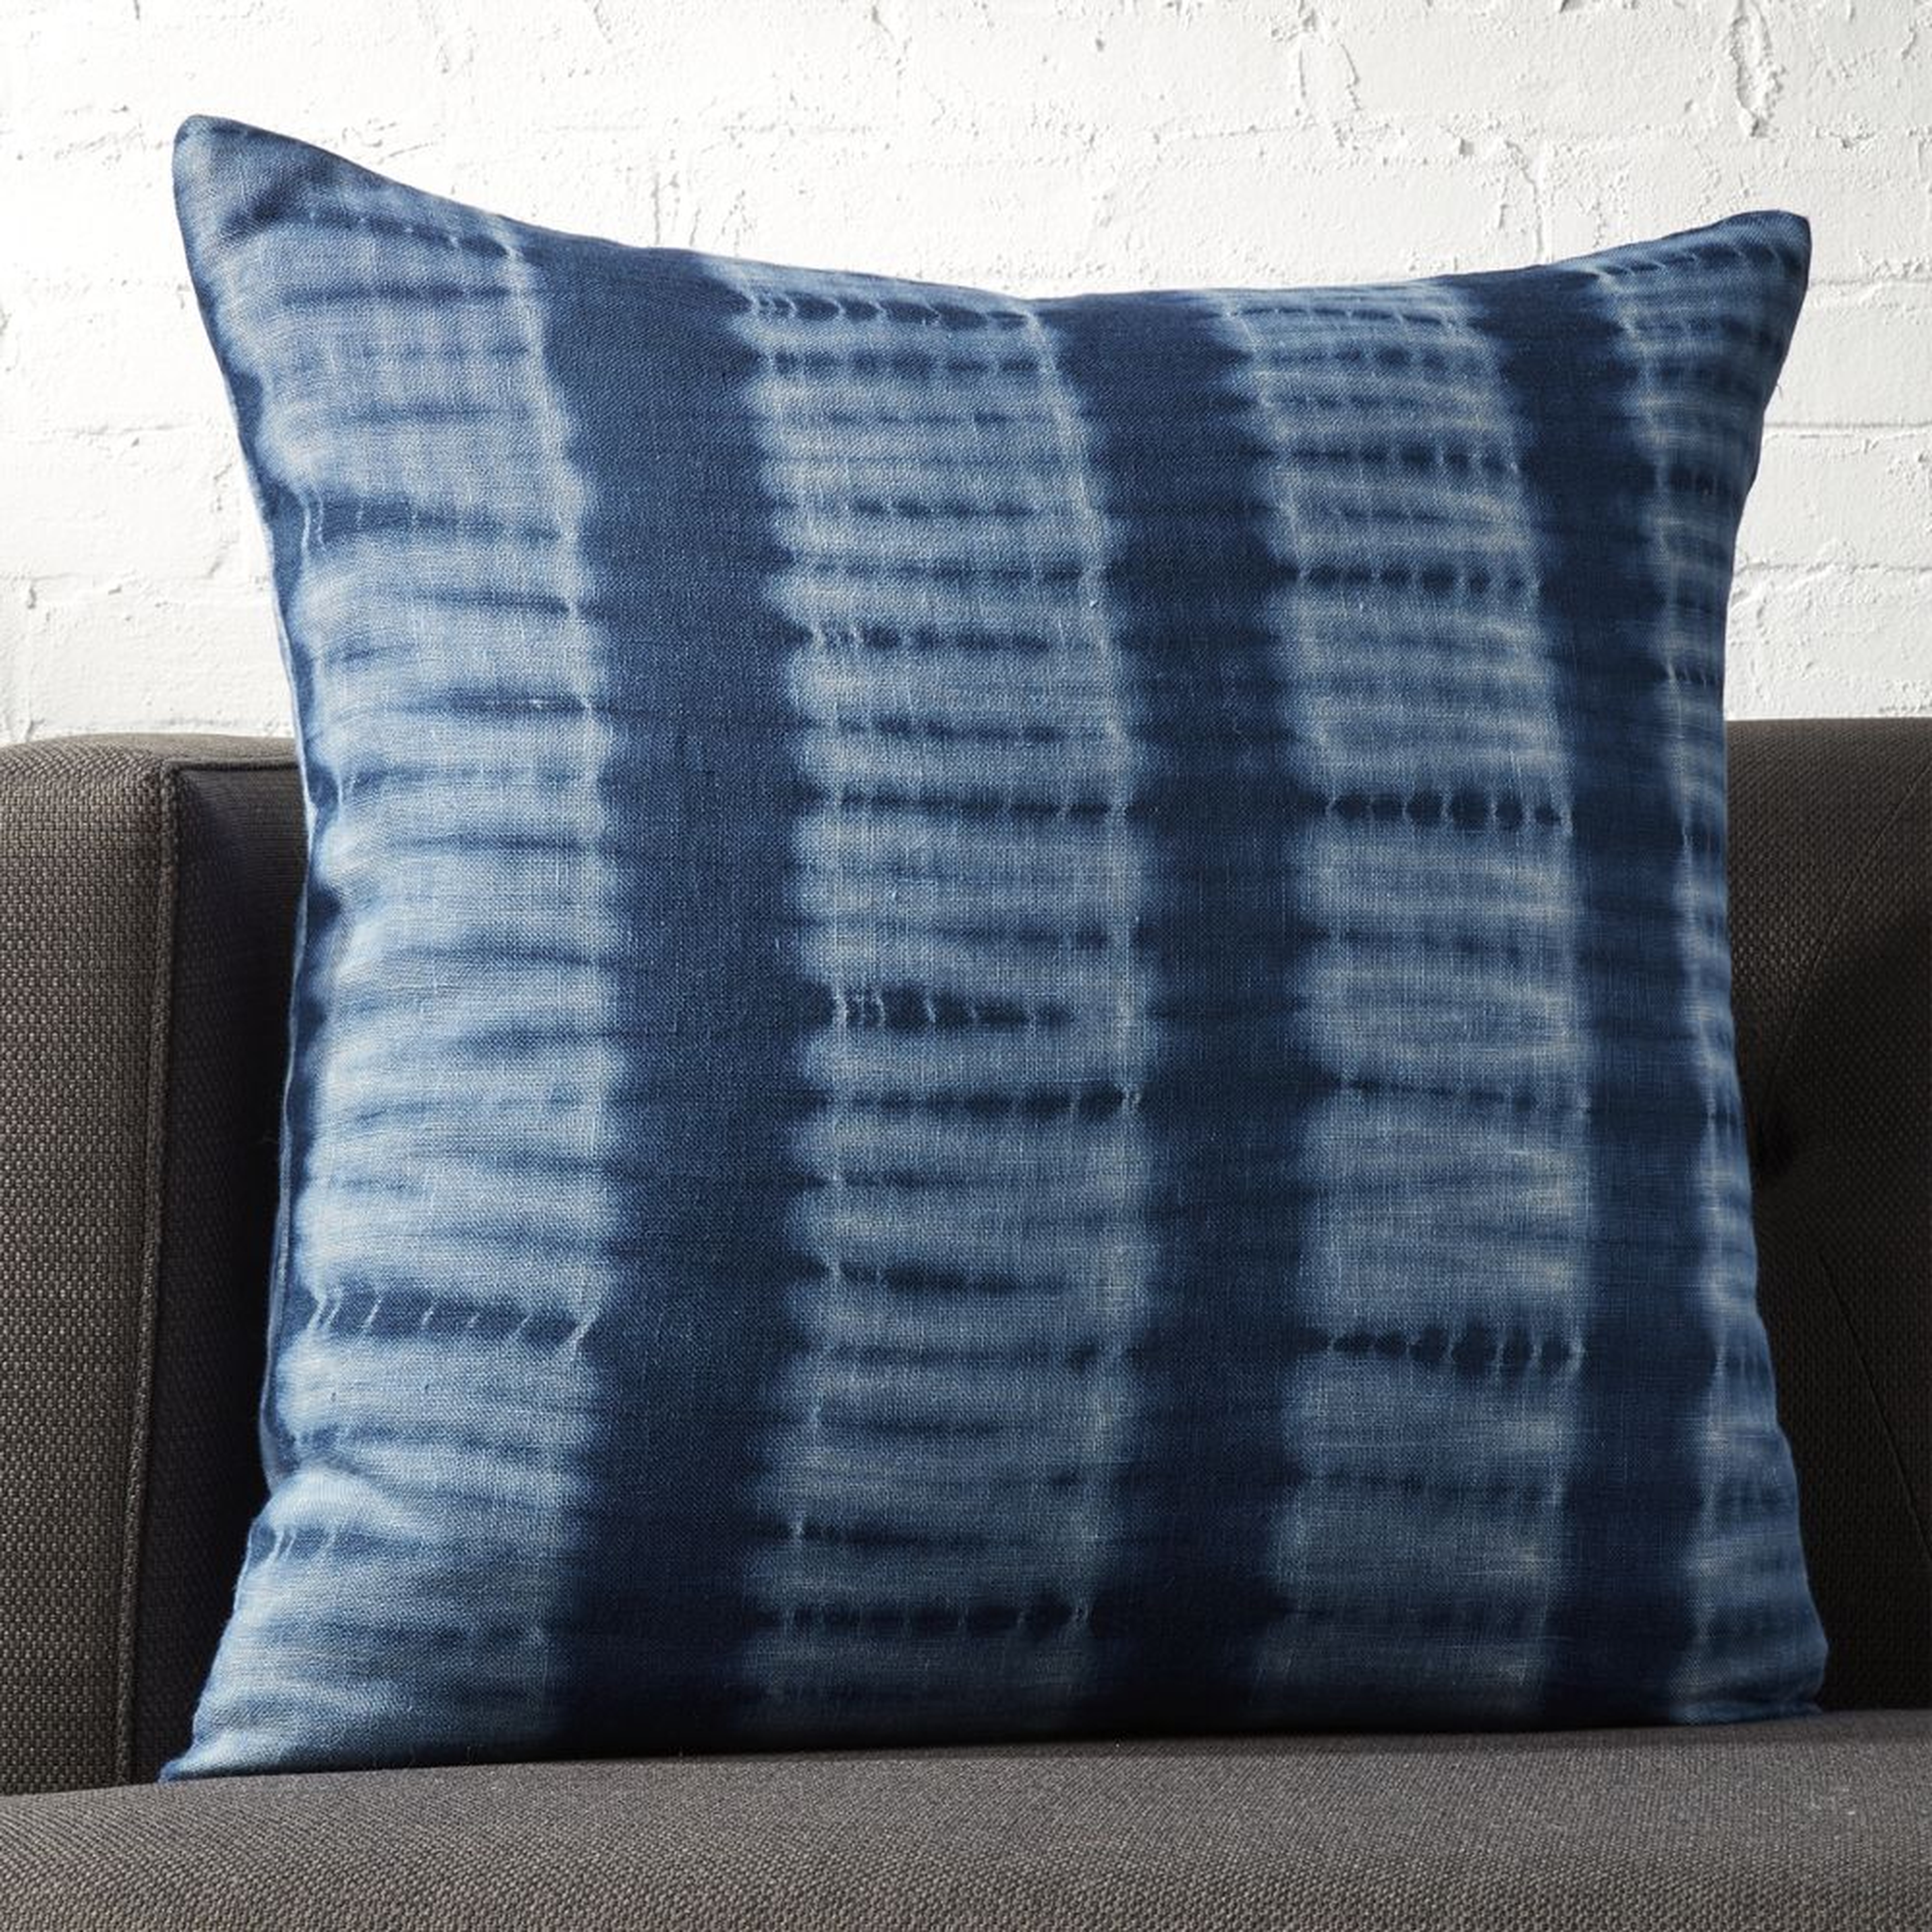 23" Indigo Blue Tie Dye Pillow with Feather-Down Insert - CB2